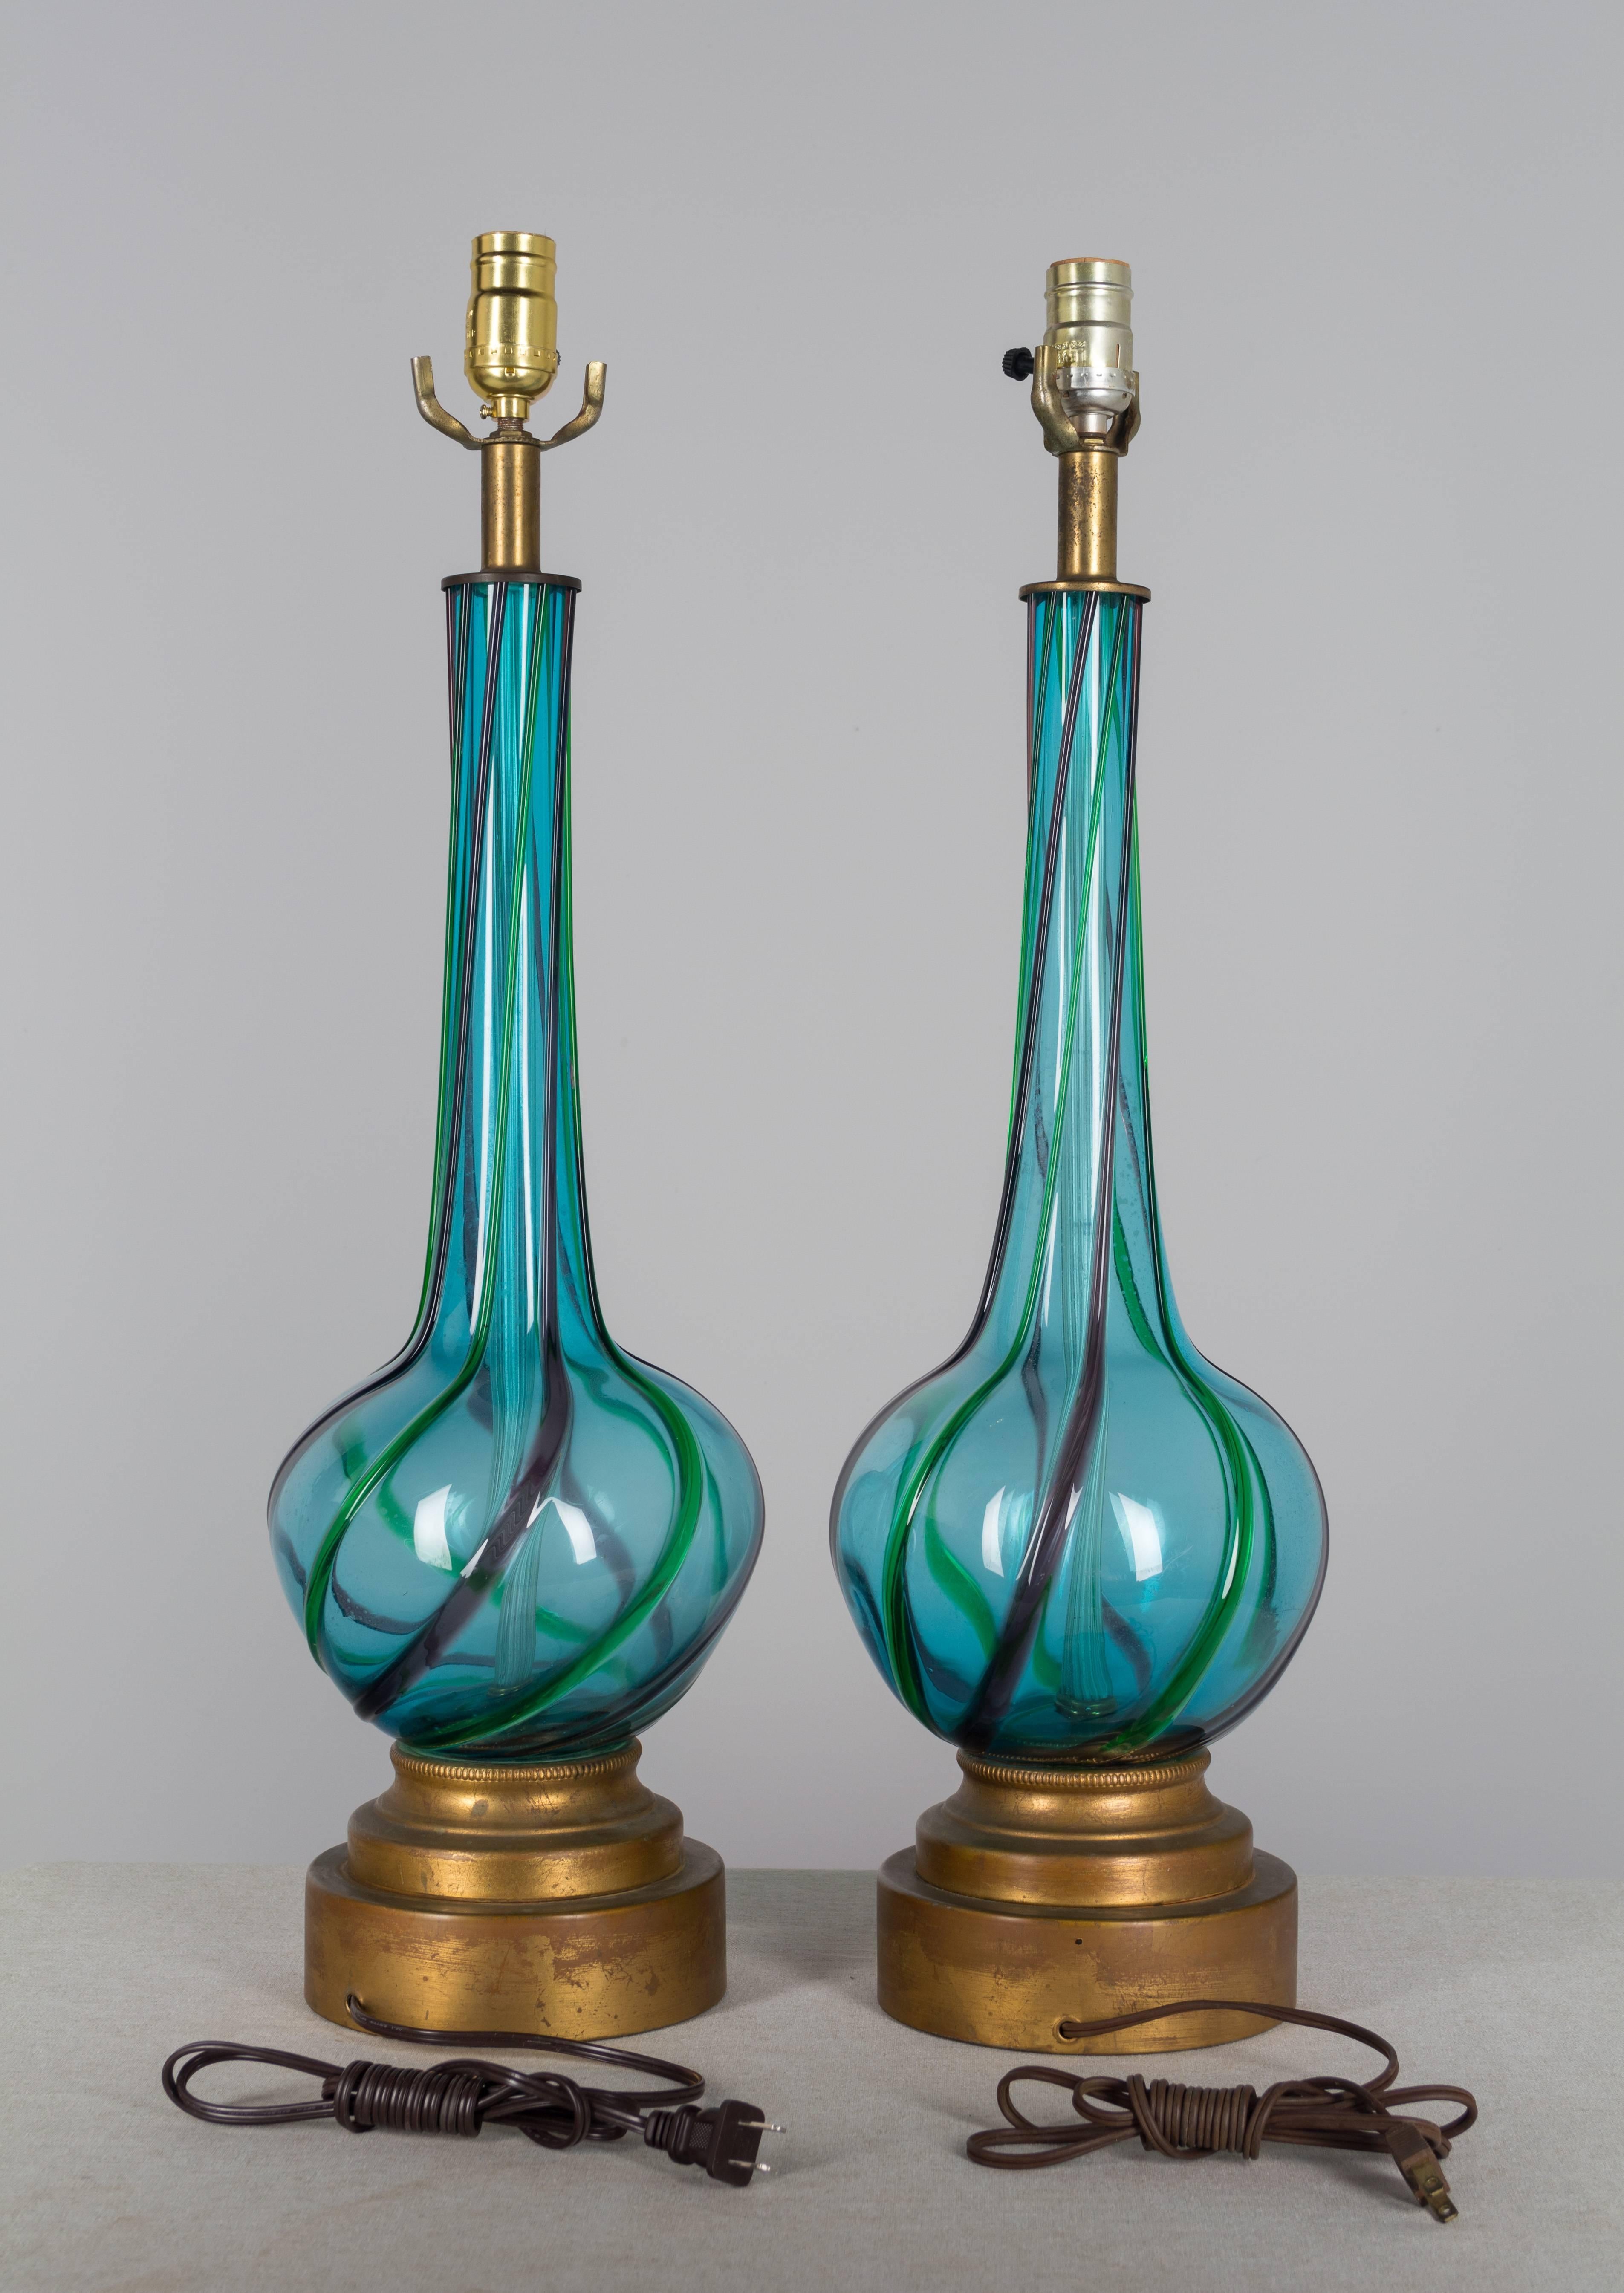 Pair of Mid-Century Murano glass lamps. Handblown, clear aqua blue color with swirling stripes of green and purple. Base is metal with gold patina. All original. The glass is in excellent condition, but has not been cleaned on the inside. These